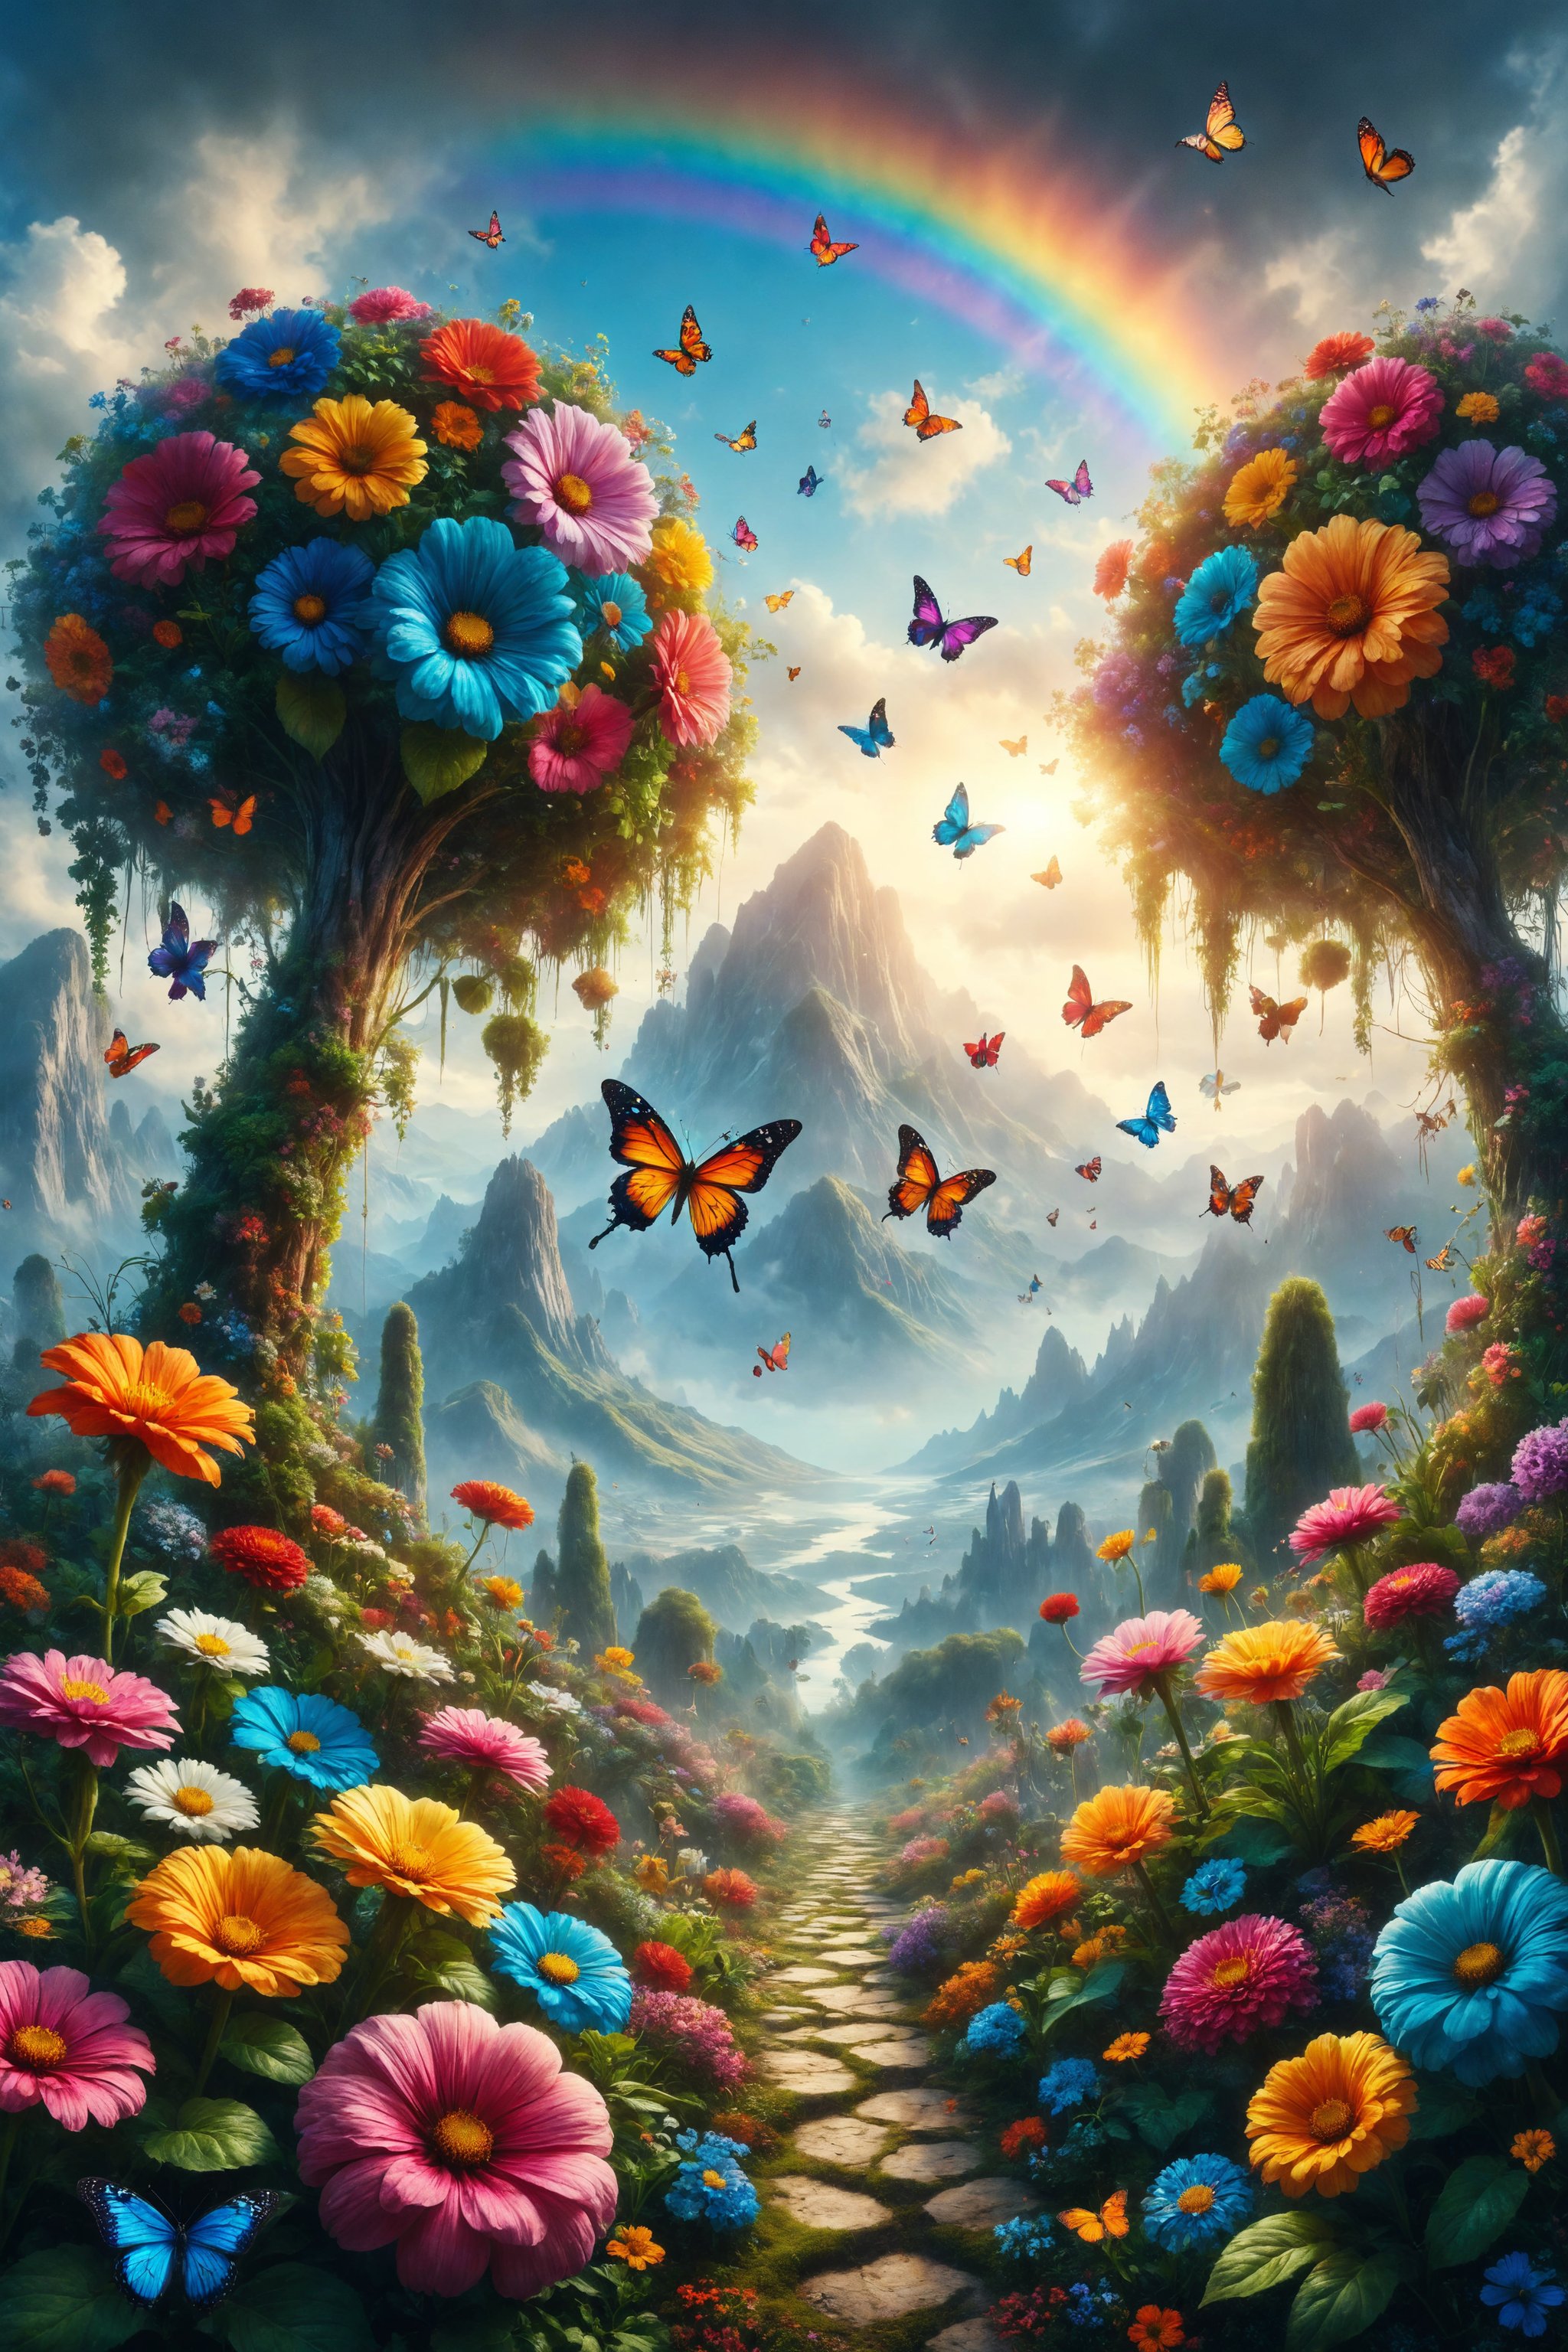 Create an illustration of a hanging garden in the sky, with giant flowers in vibrant colors and butterflies fluttering. A rainbow connects the garden to a distant mountain.